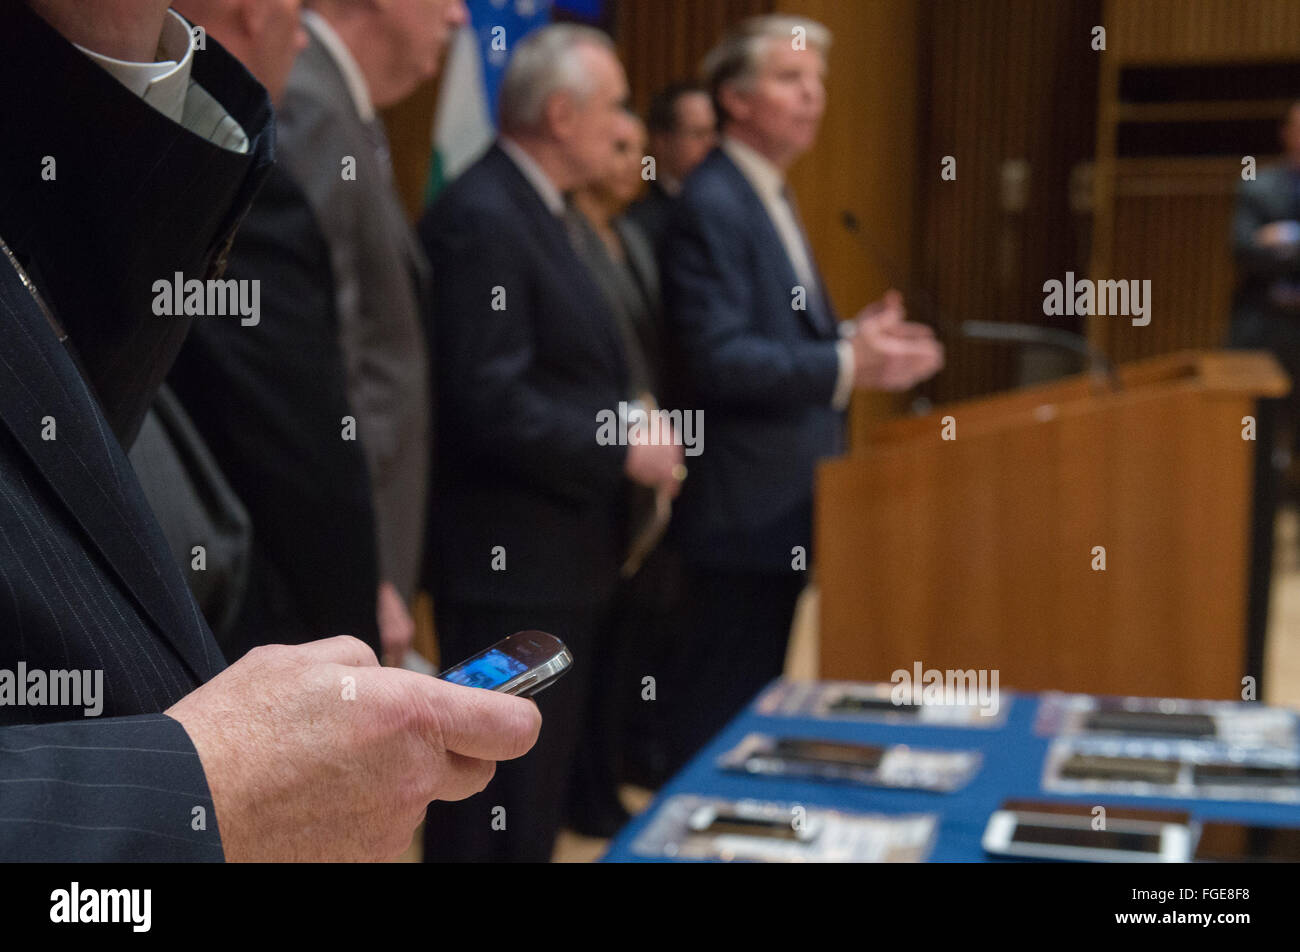 New York, NY, USA. 18th Feb, 2016. New York City Police Commissioner WILLIAM BRATTON and Manhattan District Attorney CYRUS VANCE, JR. discuss smartphone encryption at a press conference at Police Plaza, Thursday, Feb. 18, 2016. © Bryan Smith/ZUMA Wire/Alamy Live News Stock Photo